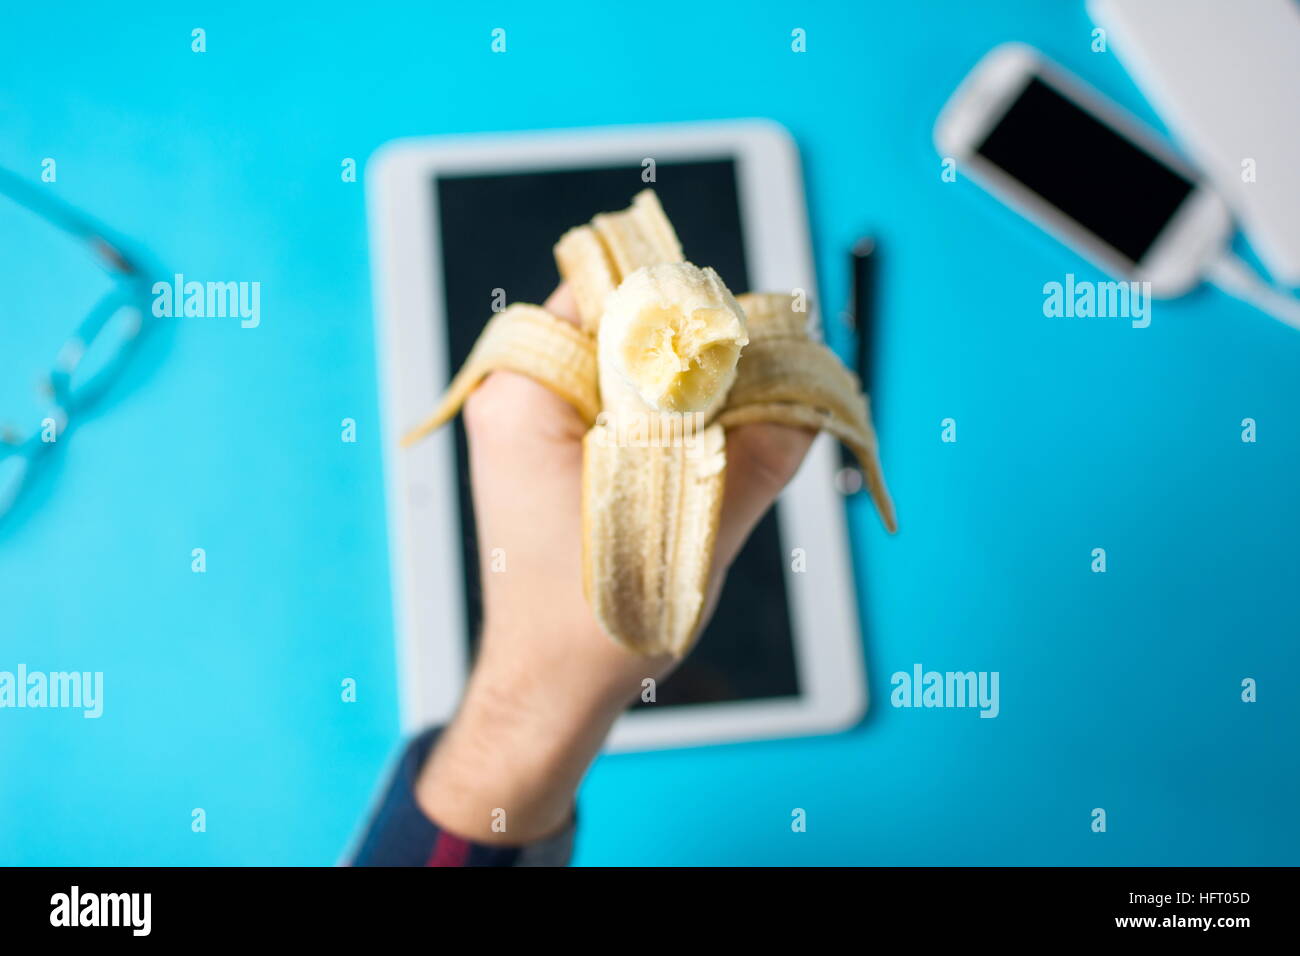 Man holding a banana at work in the office Stock Photo